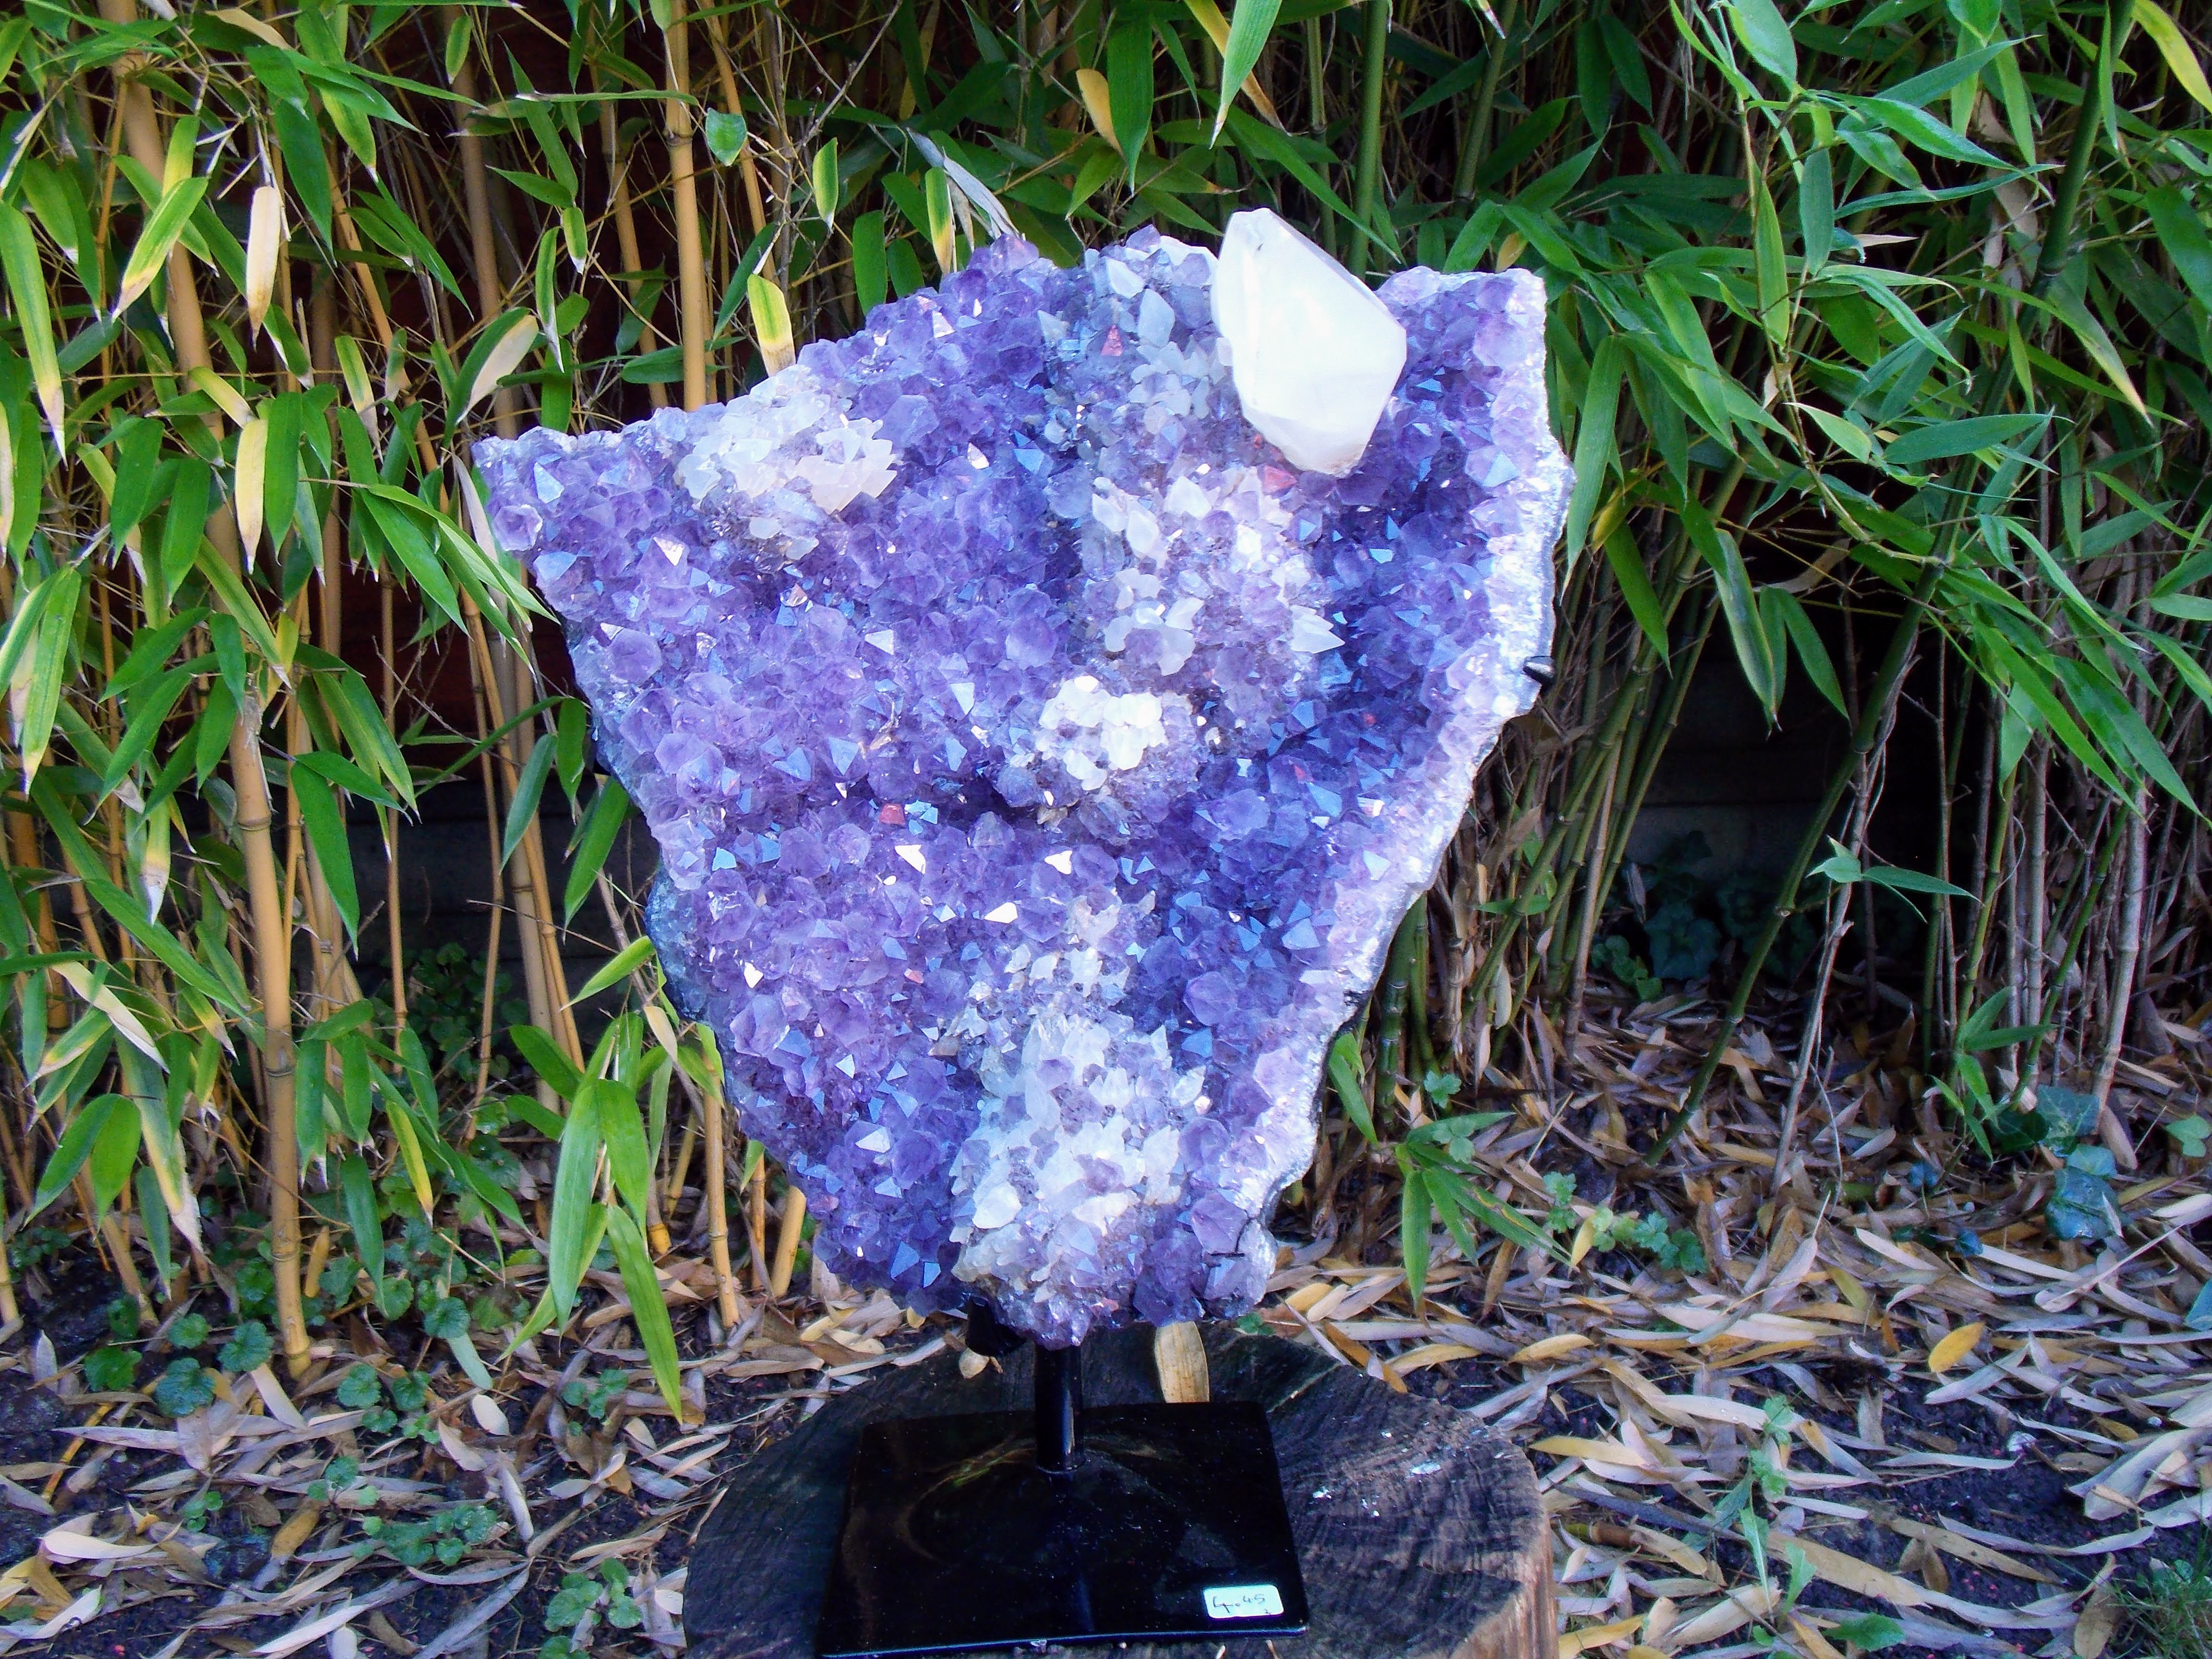 Amethyst Cluster With Calcite Inclusions